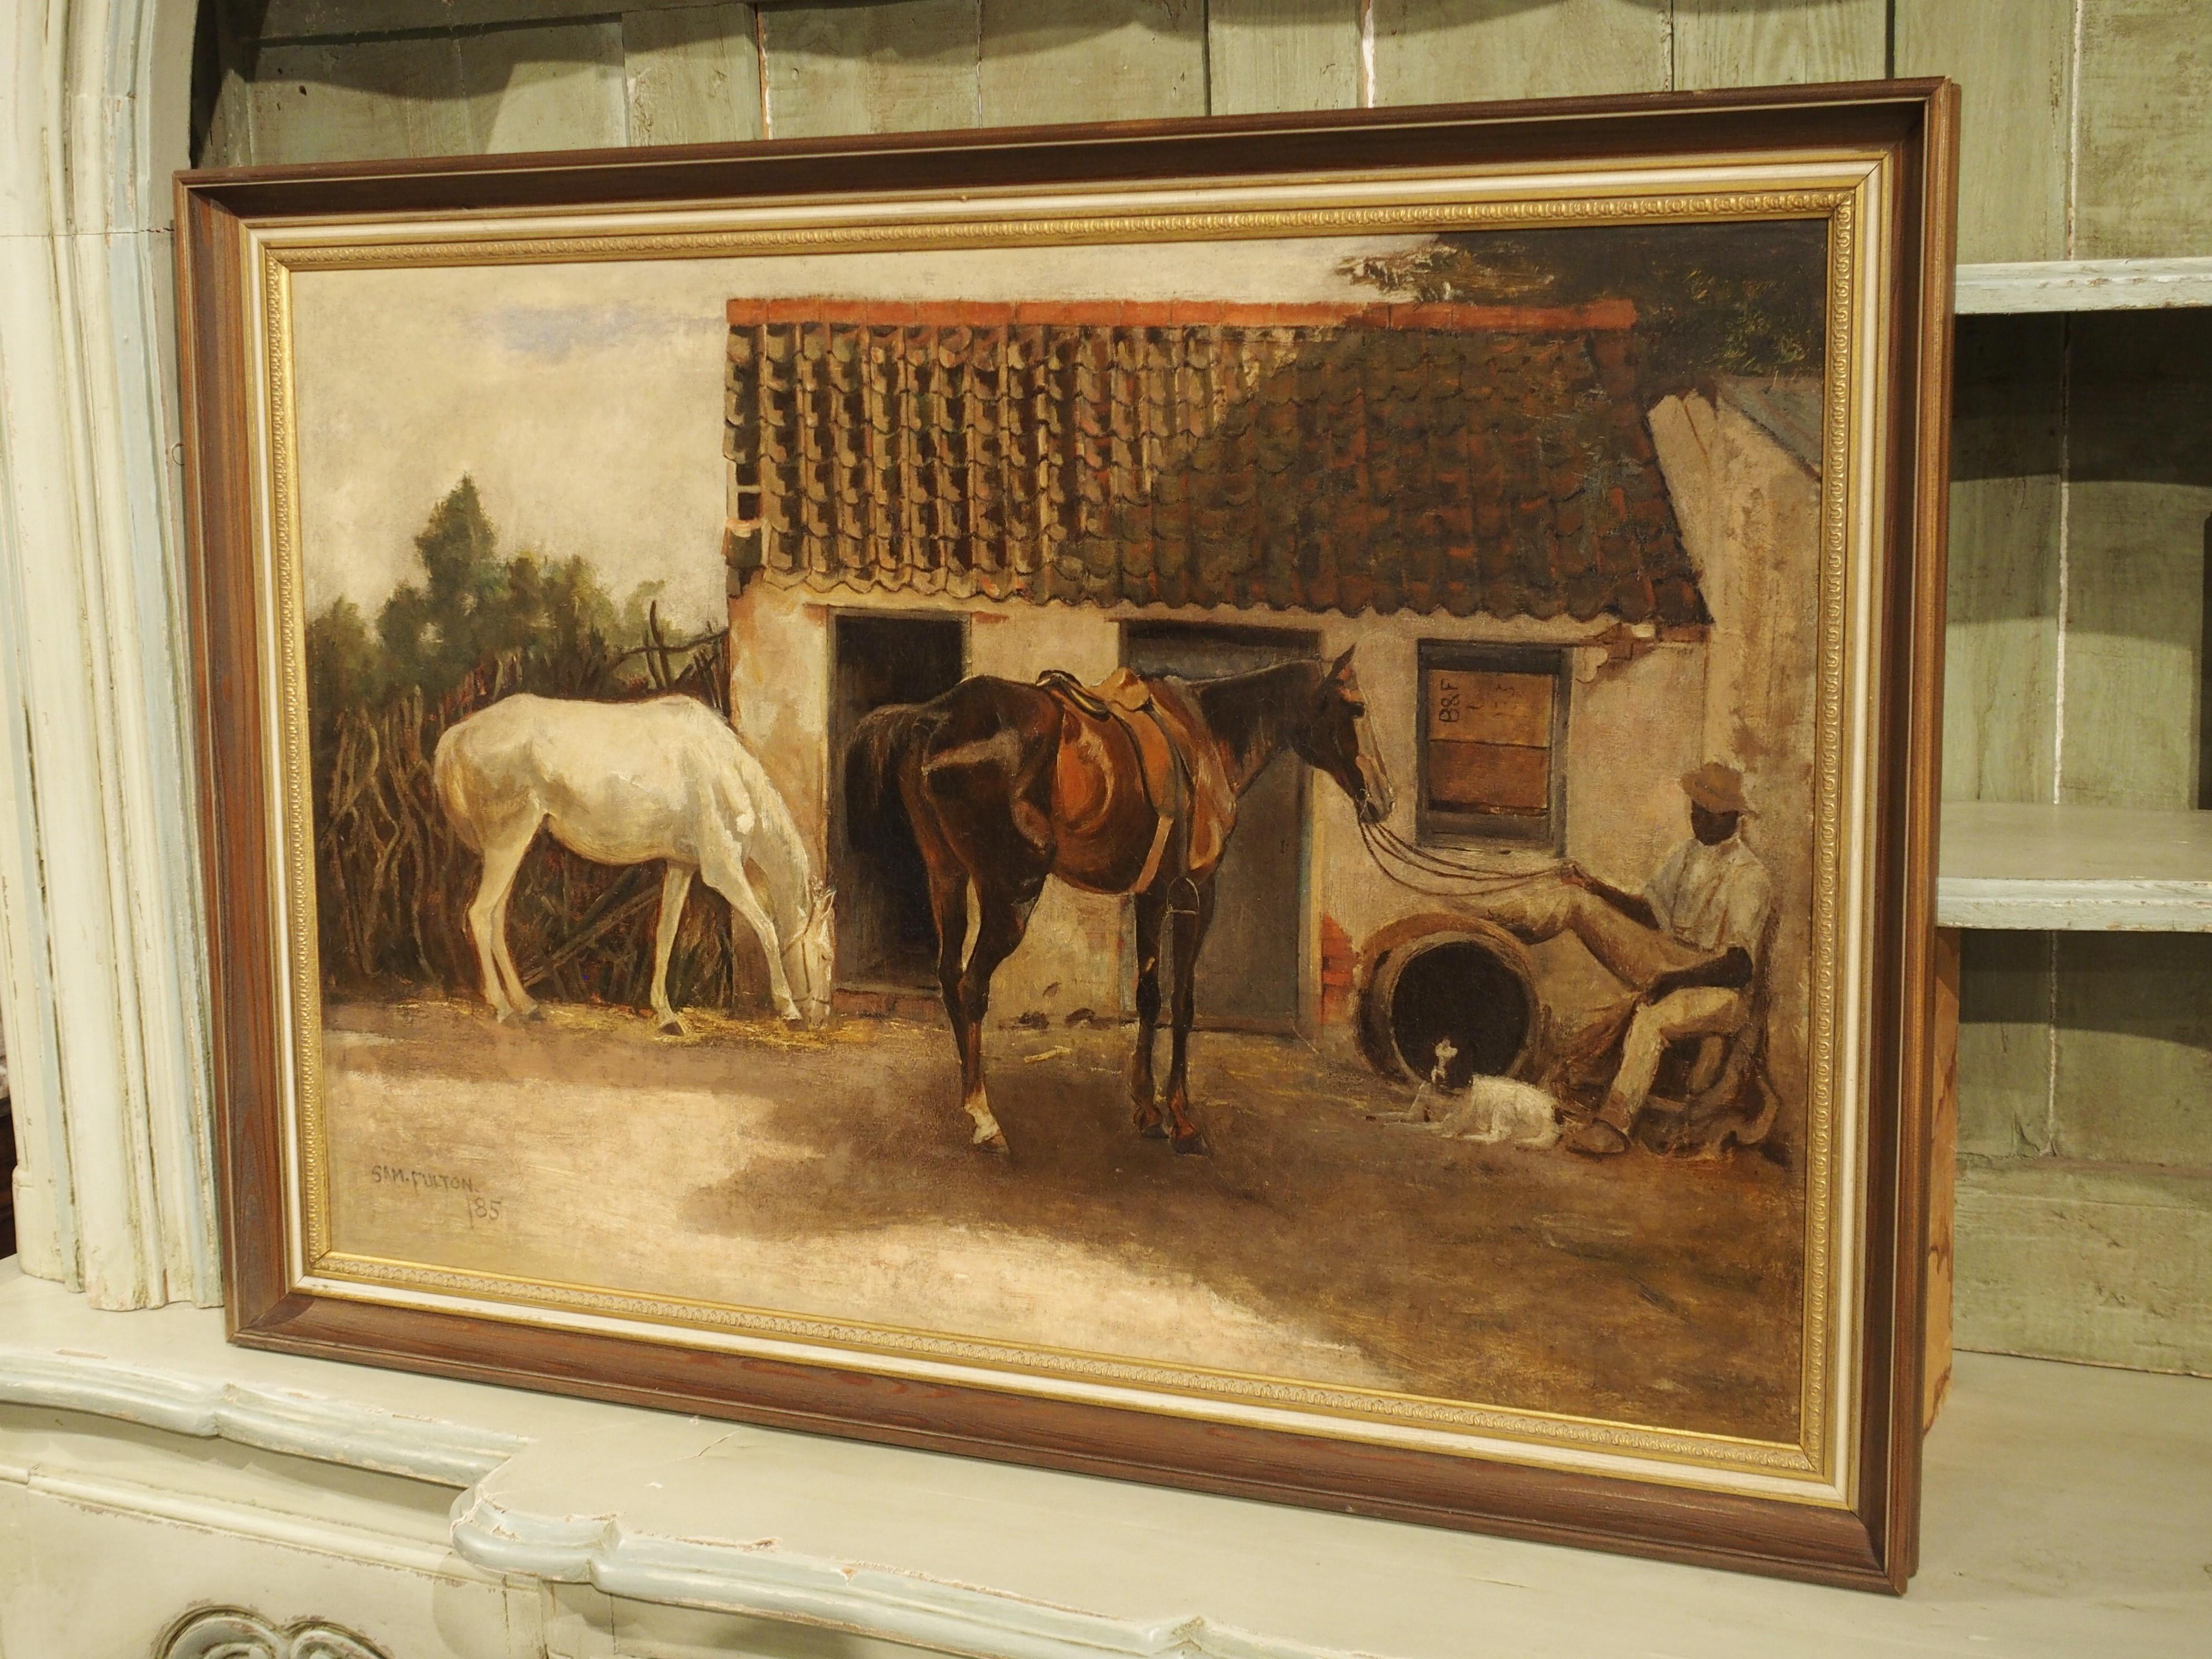 This quaint oil on canvas painting of horses is from 1885, by the Scottish painter Sam Fulton. The artwork is signed and dated in the lower left corner.

A tranquil offering, the painting depicts a “horse groom” relaxing in front of a building